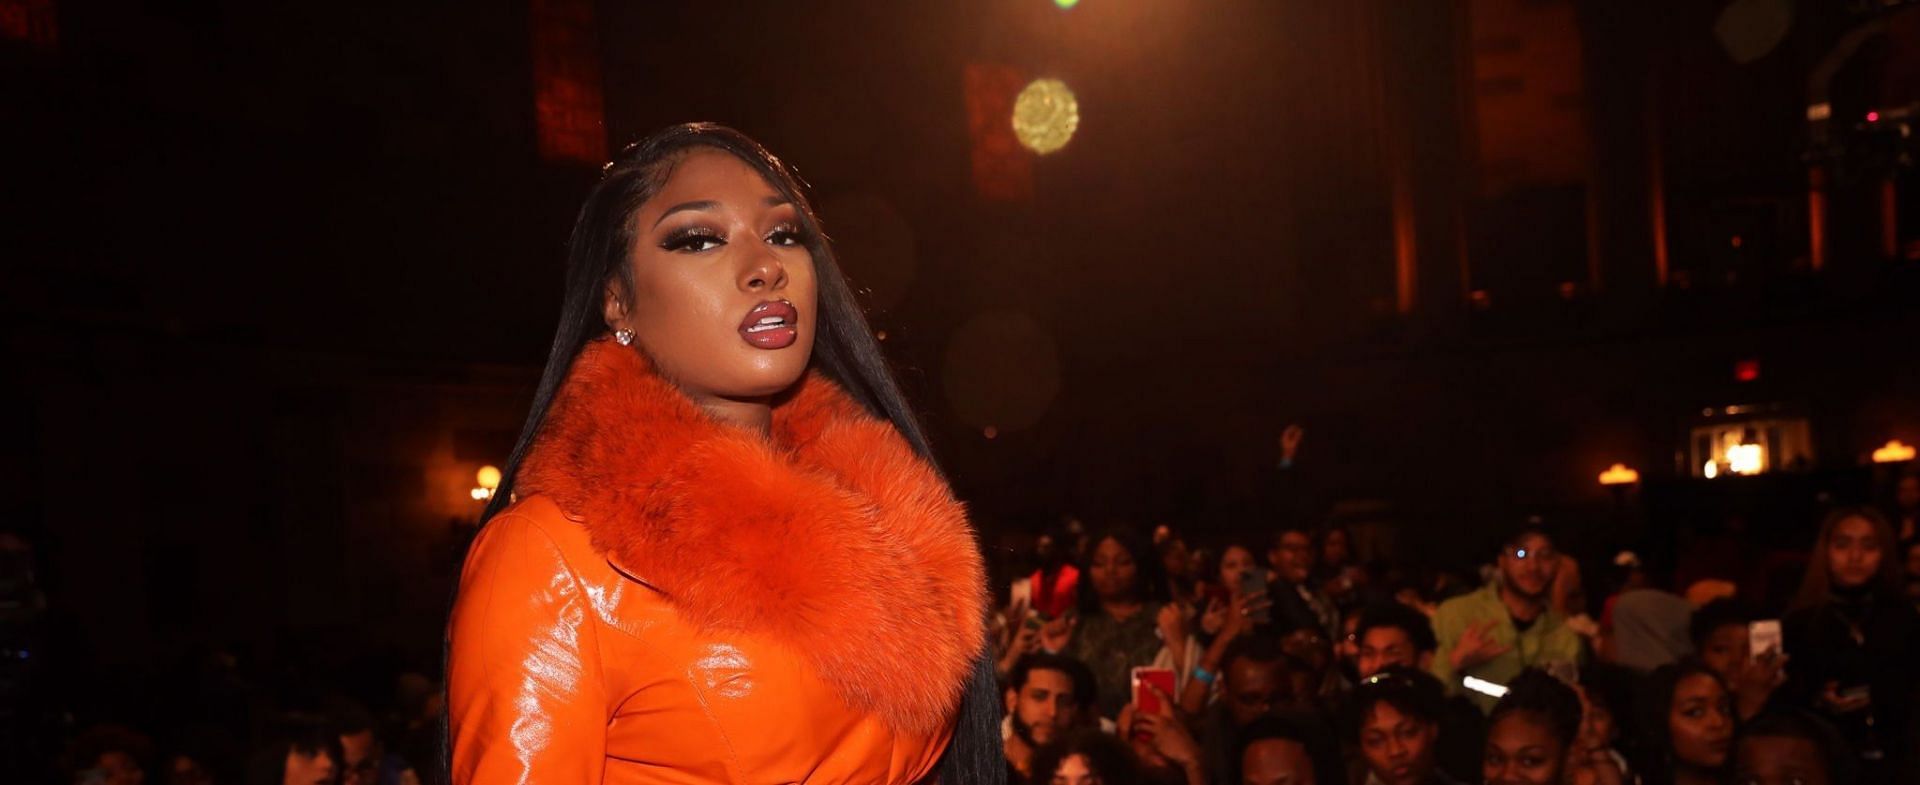 Megan Thee Stallion&#039;s doctor revealed the rapper was injured on foot by the glass and nit gunshot (Image via Getty Images)